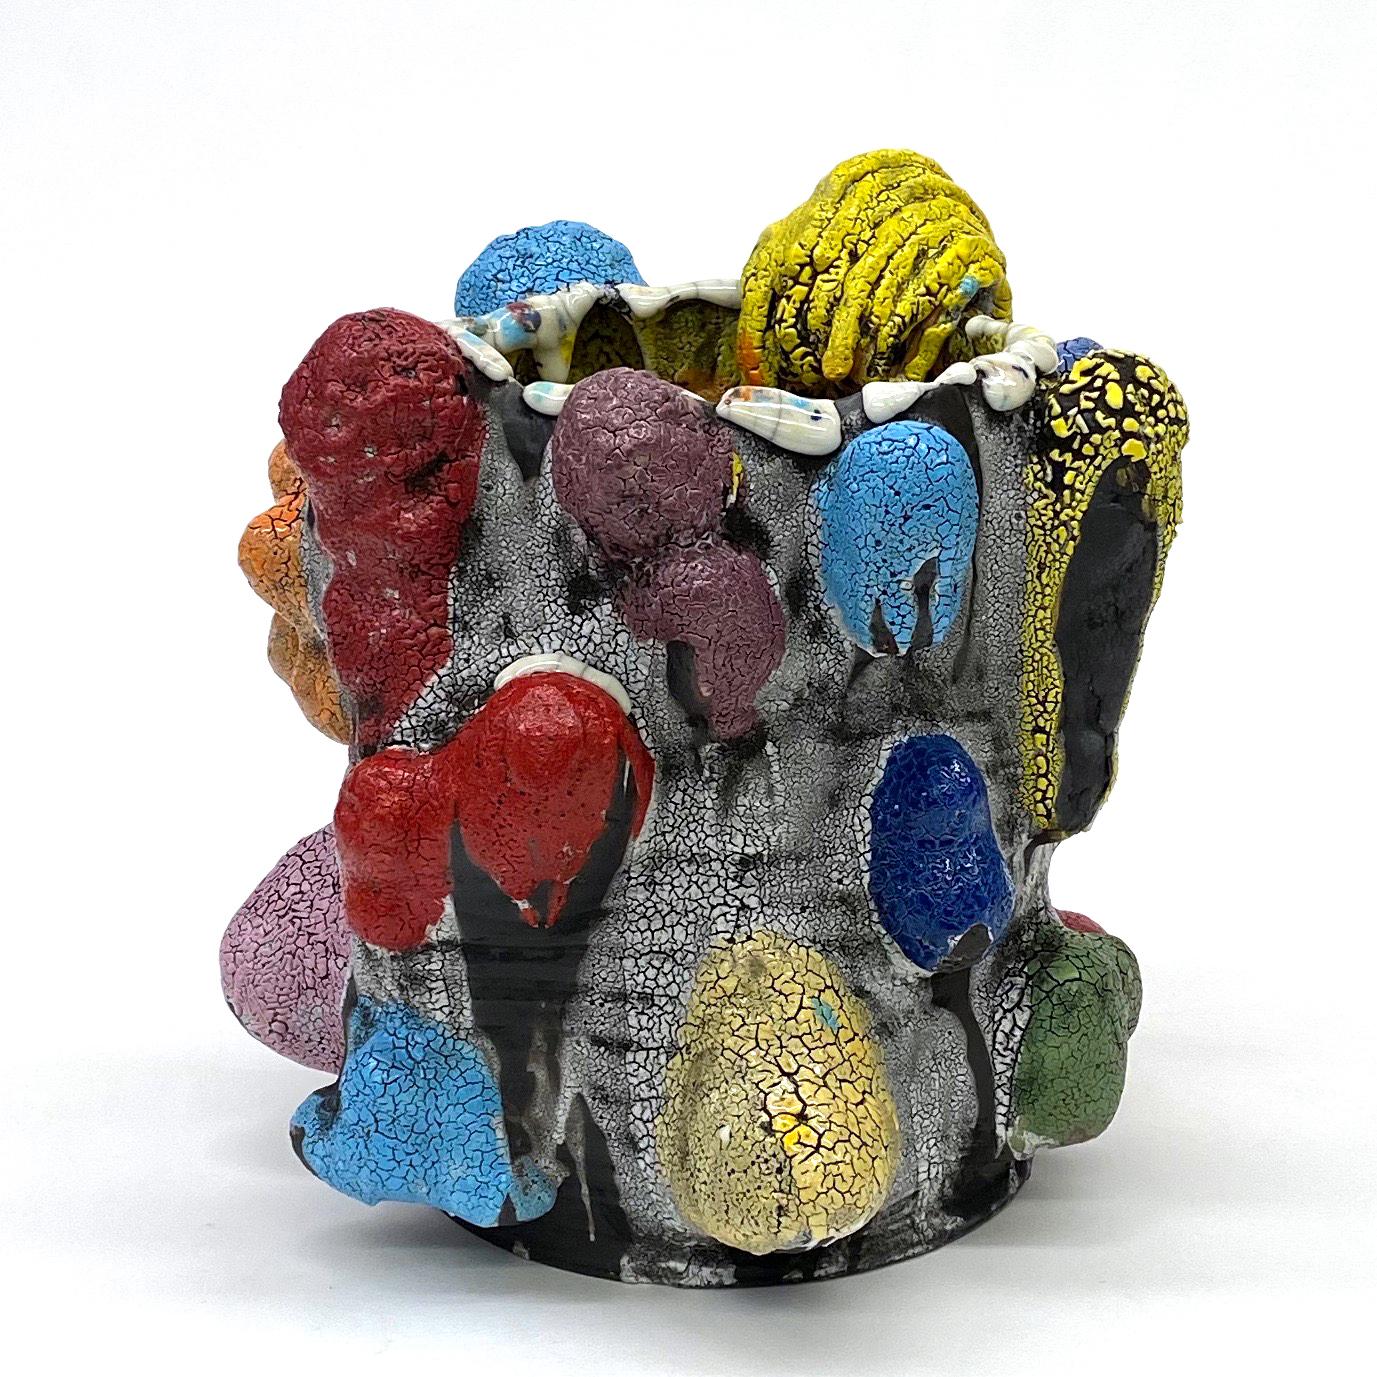 	Vince Palacios (b.1961, Flint, Michigan) has been working in the fields of ceramics since 1992 and currently serves as Professor of the Ceramics Department at El Camino College in Torrance, California. Literally overflowing with bright colors and